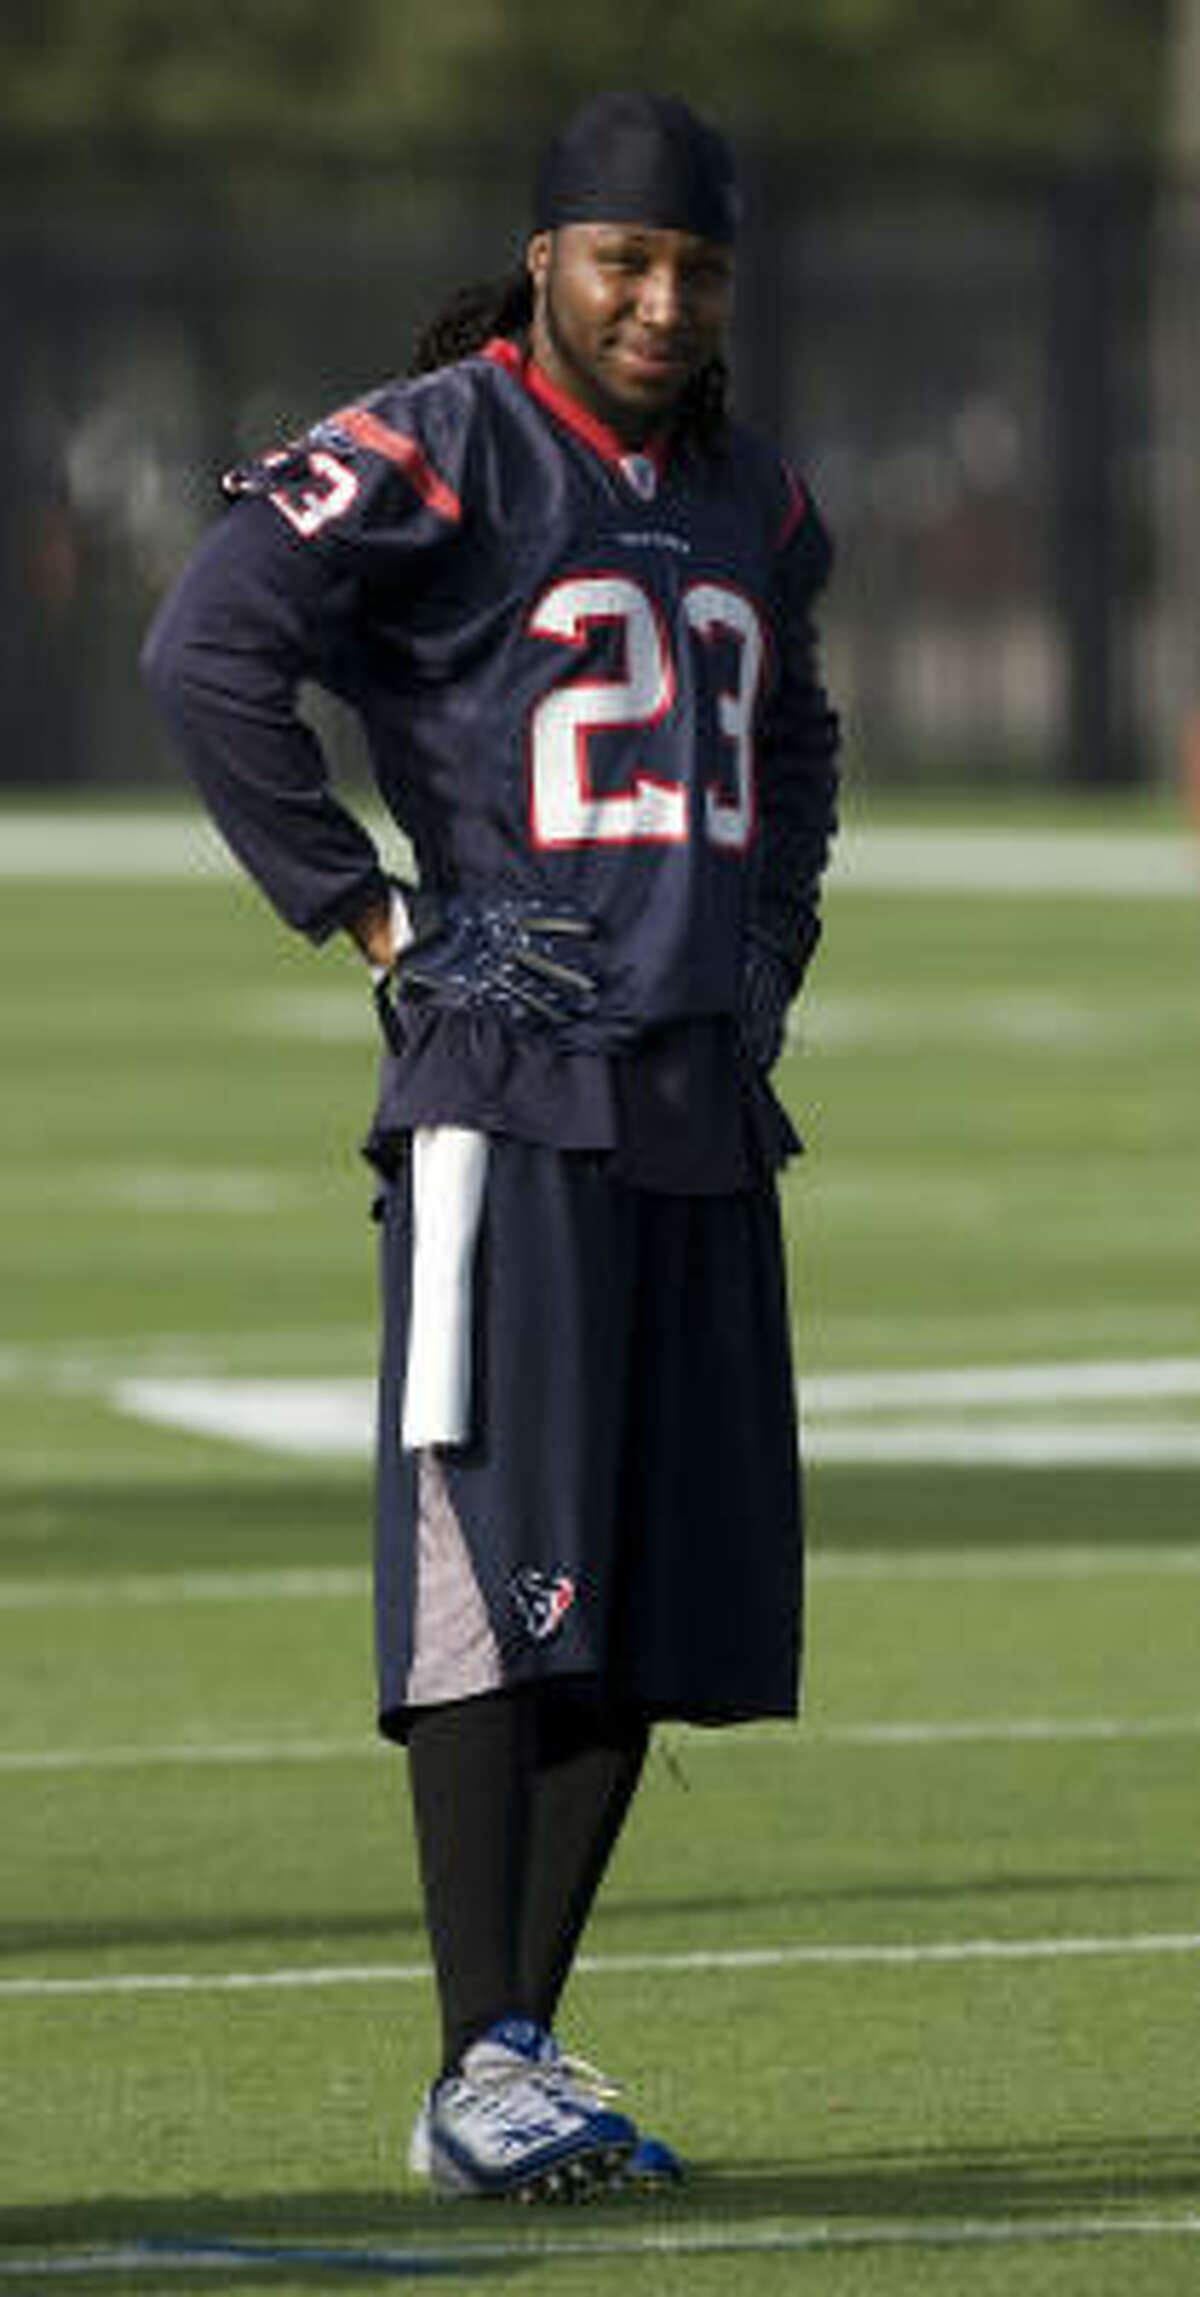 Texans cornerback Dunta Robinson is itching to return to the playing field. His wait could end this weekend.